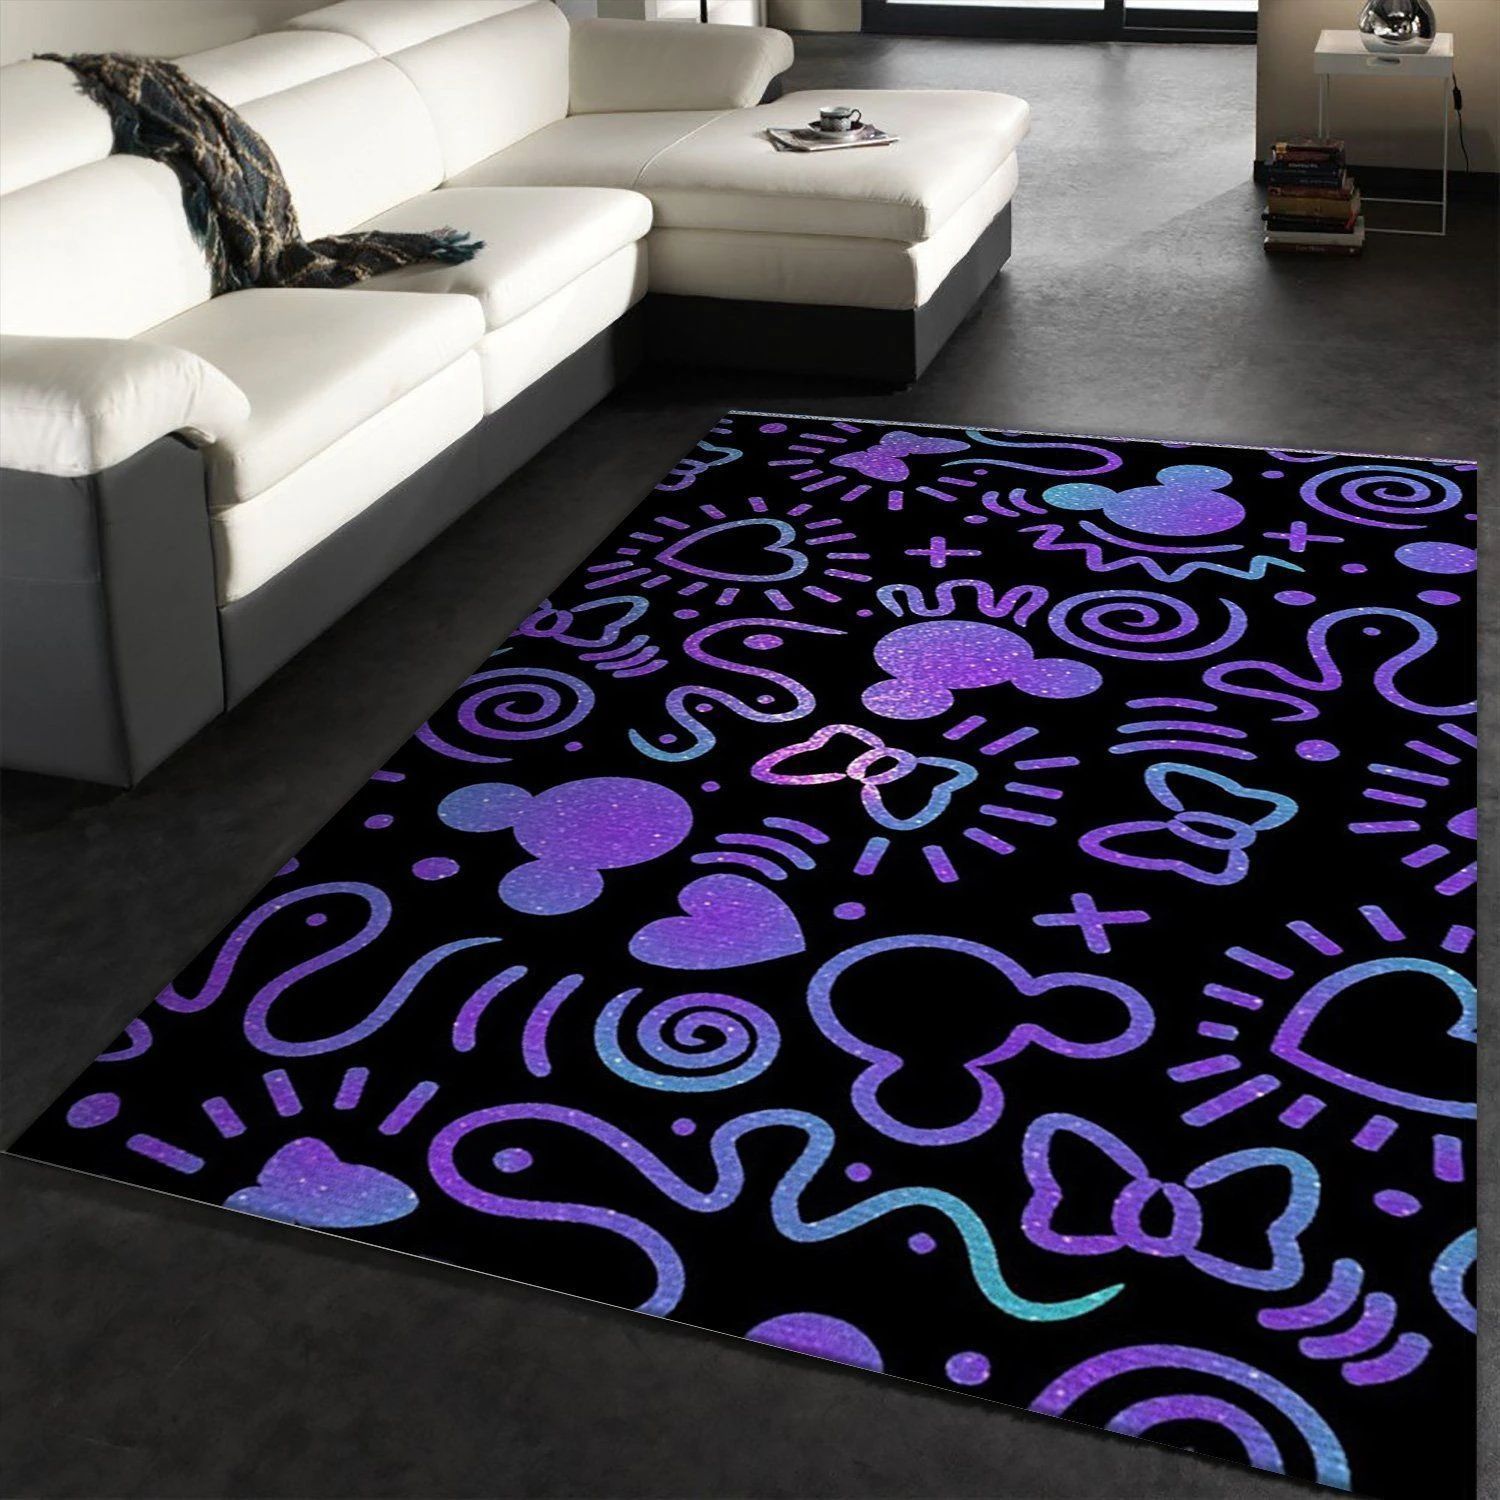 Minnie Mouse Movie Area Rug, Kitchen Rug, Christmas Gift US Decor - Indoor Outdoor Rugs